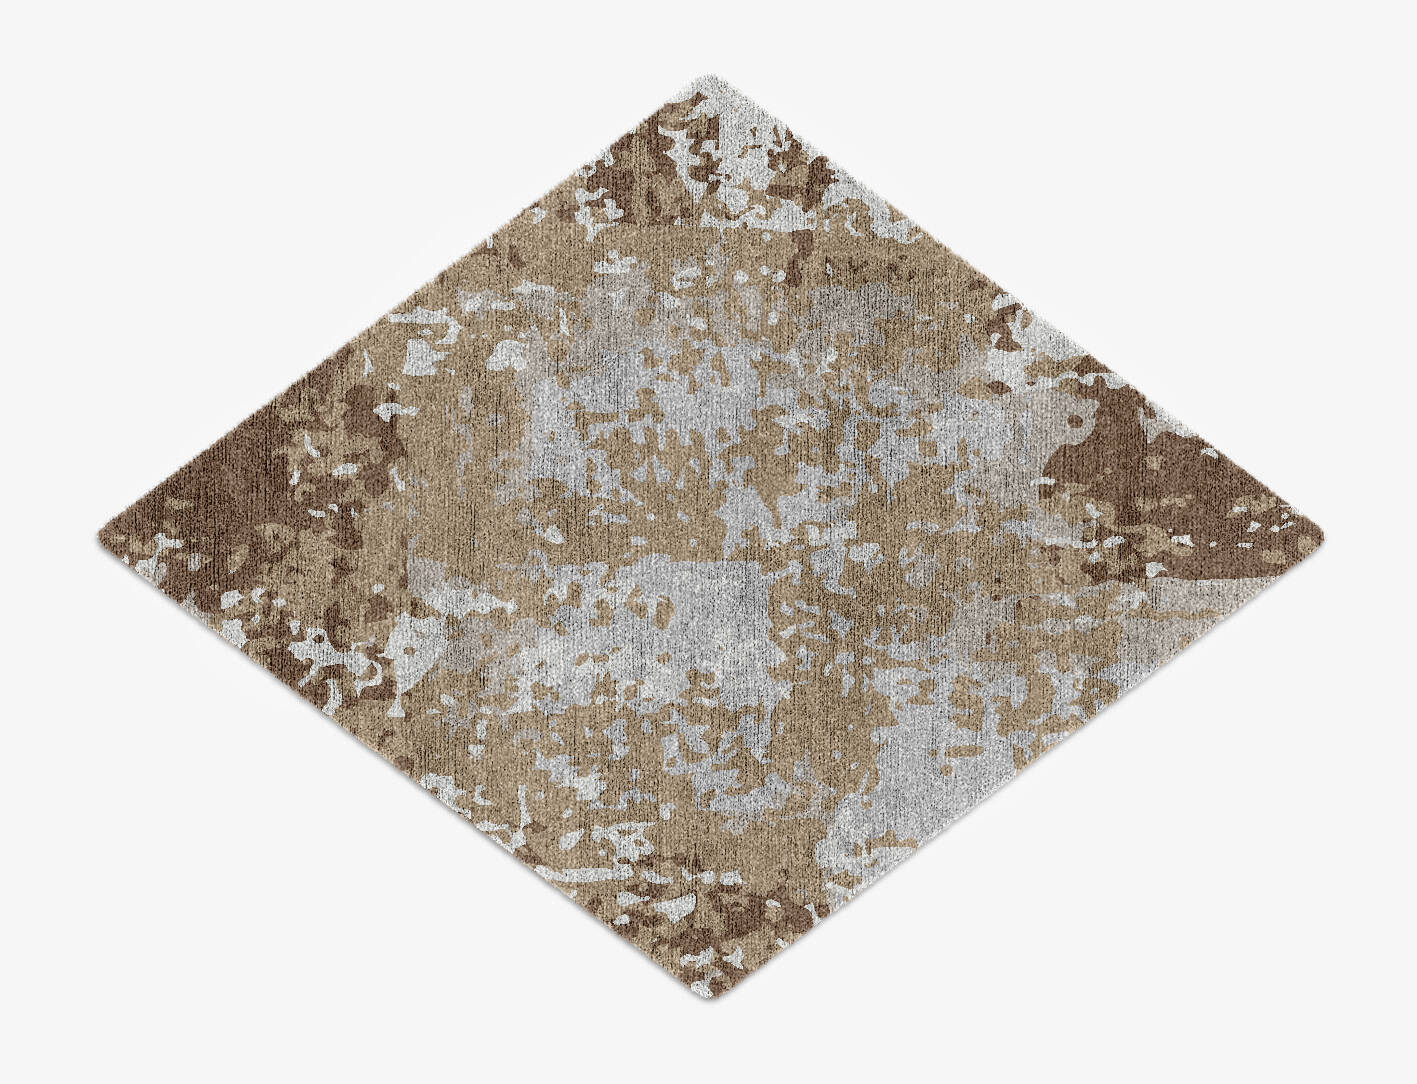 Patches Surface Art Diamond Hand Knotted Bamboo Silk Custom Rug by Rug Artisan